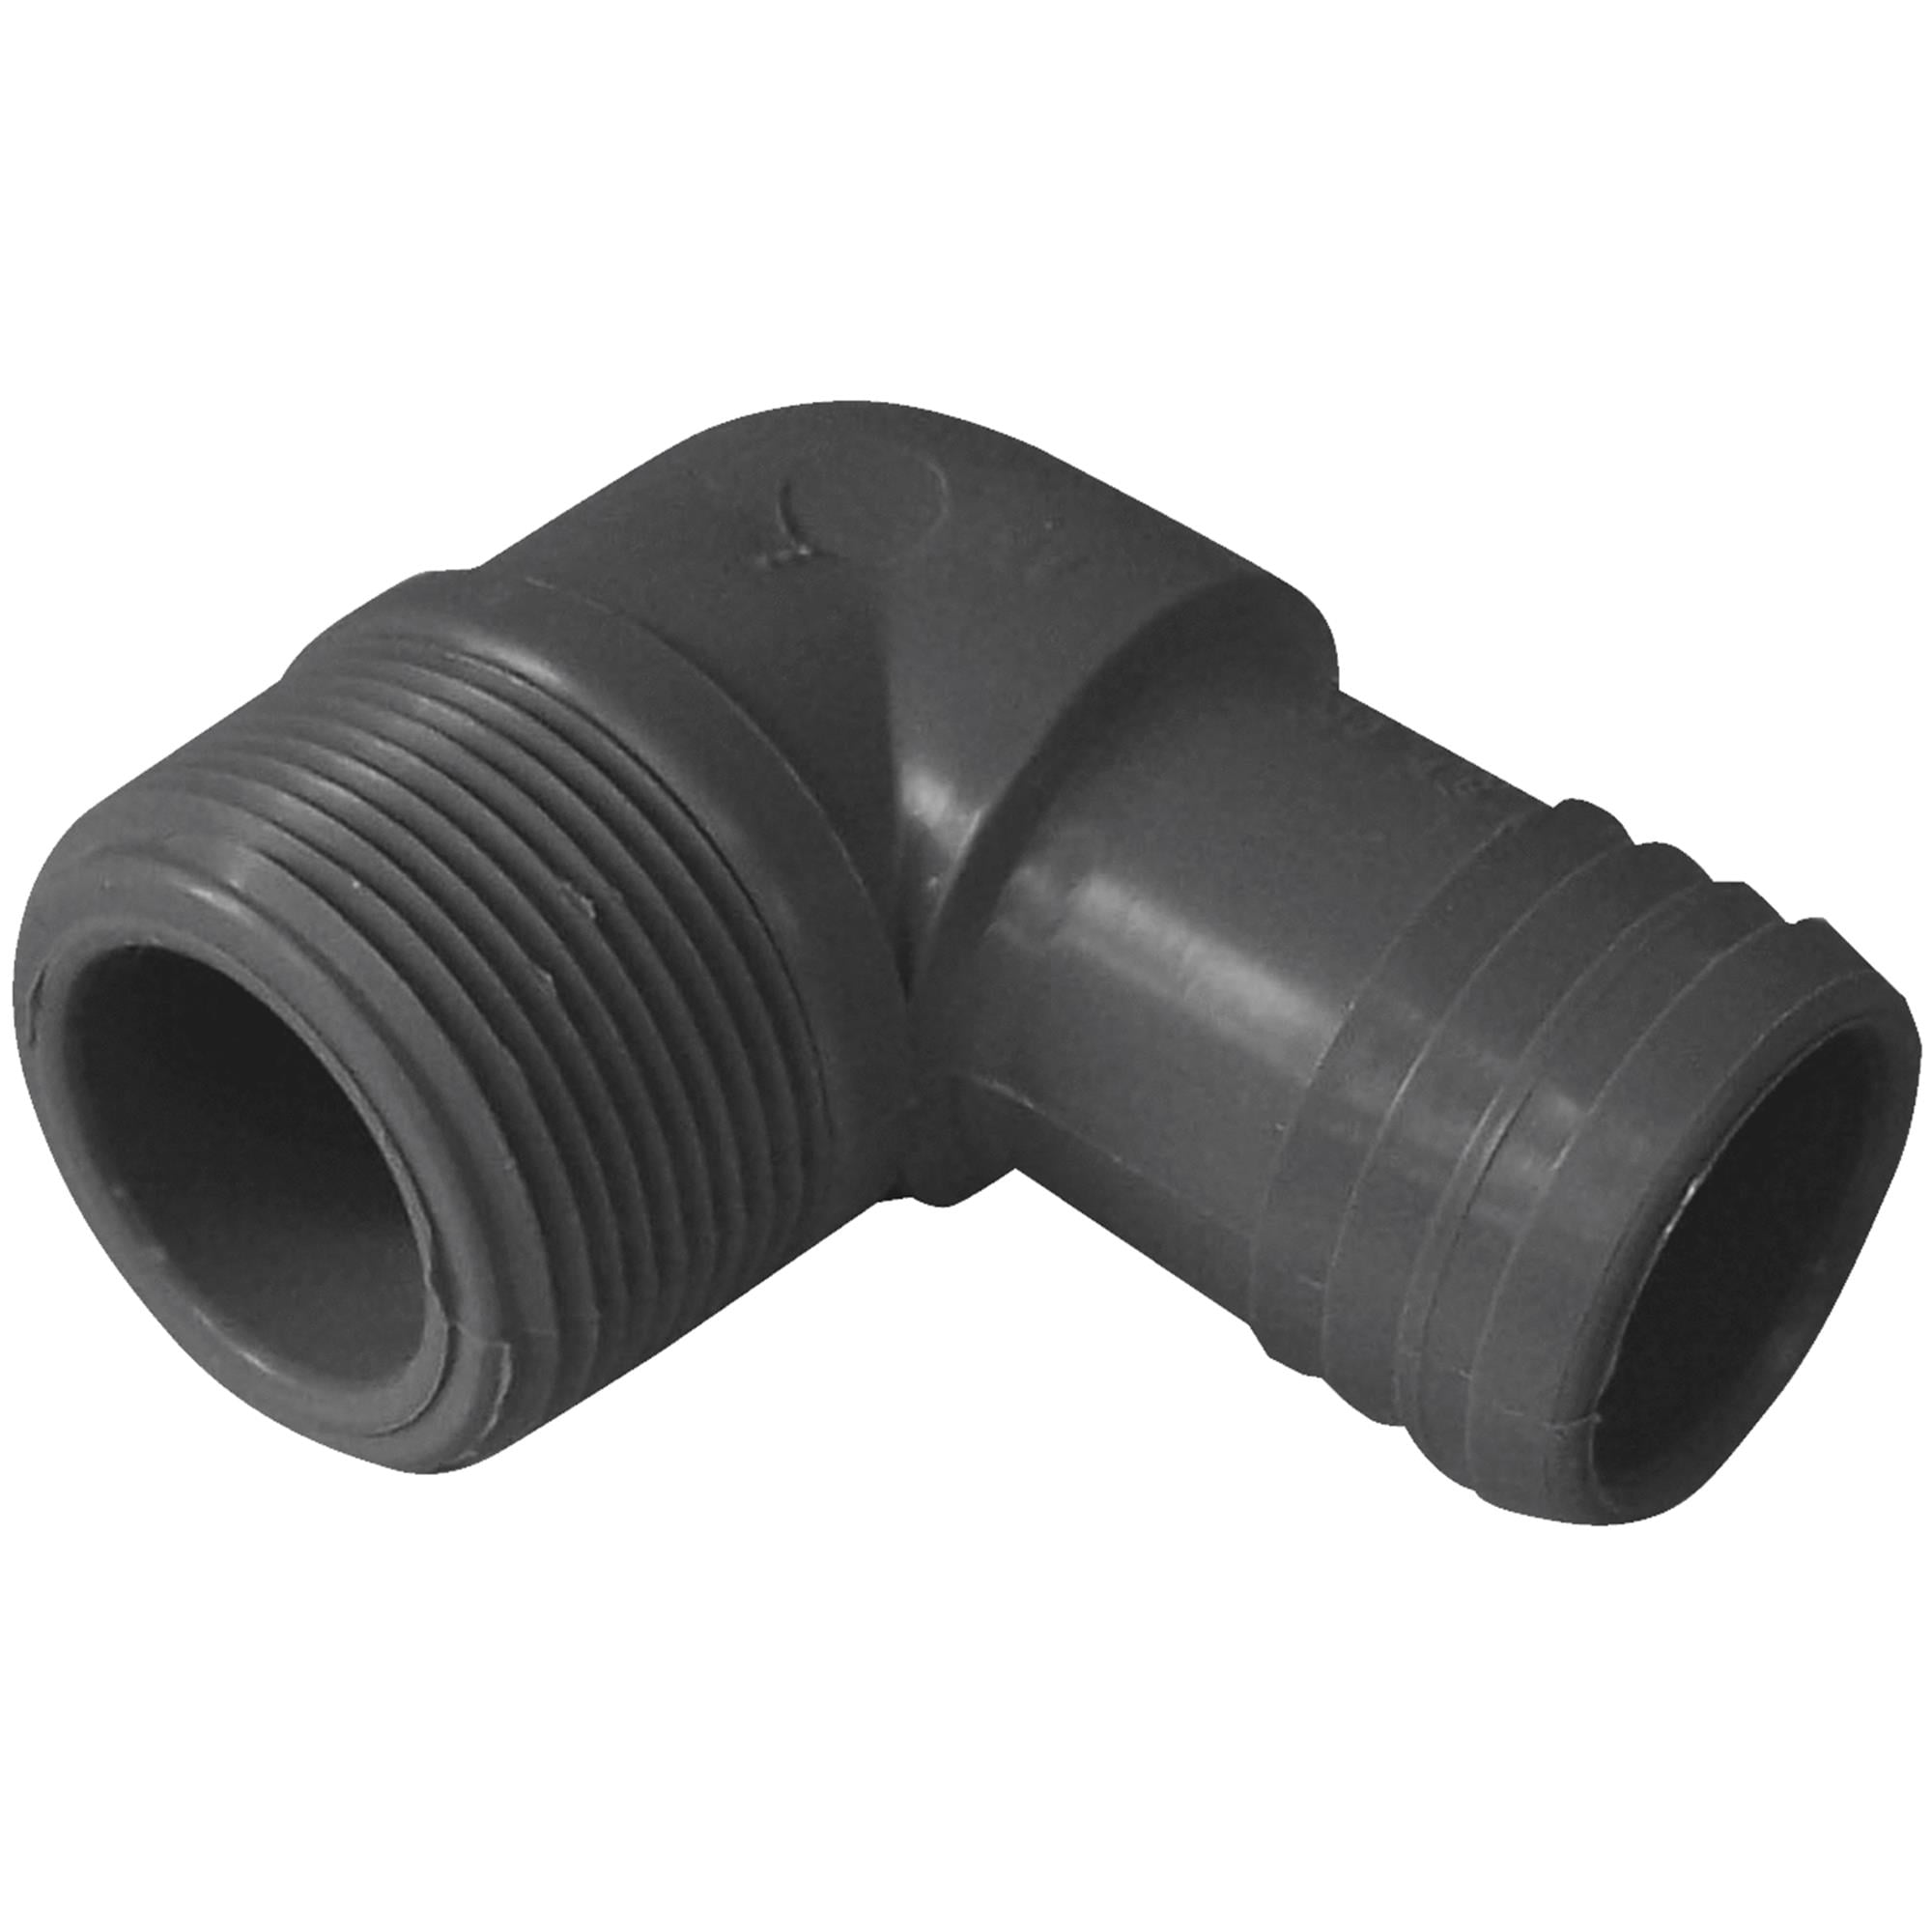 Ins x Mip 1 1/2" Genova Products 352815 Combination Elbow Pipe Fitting 